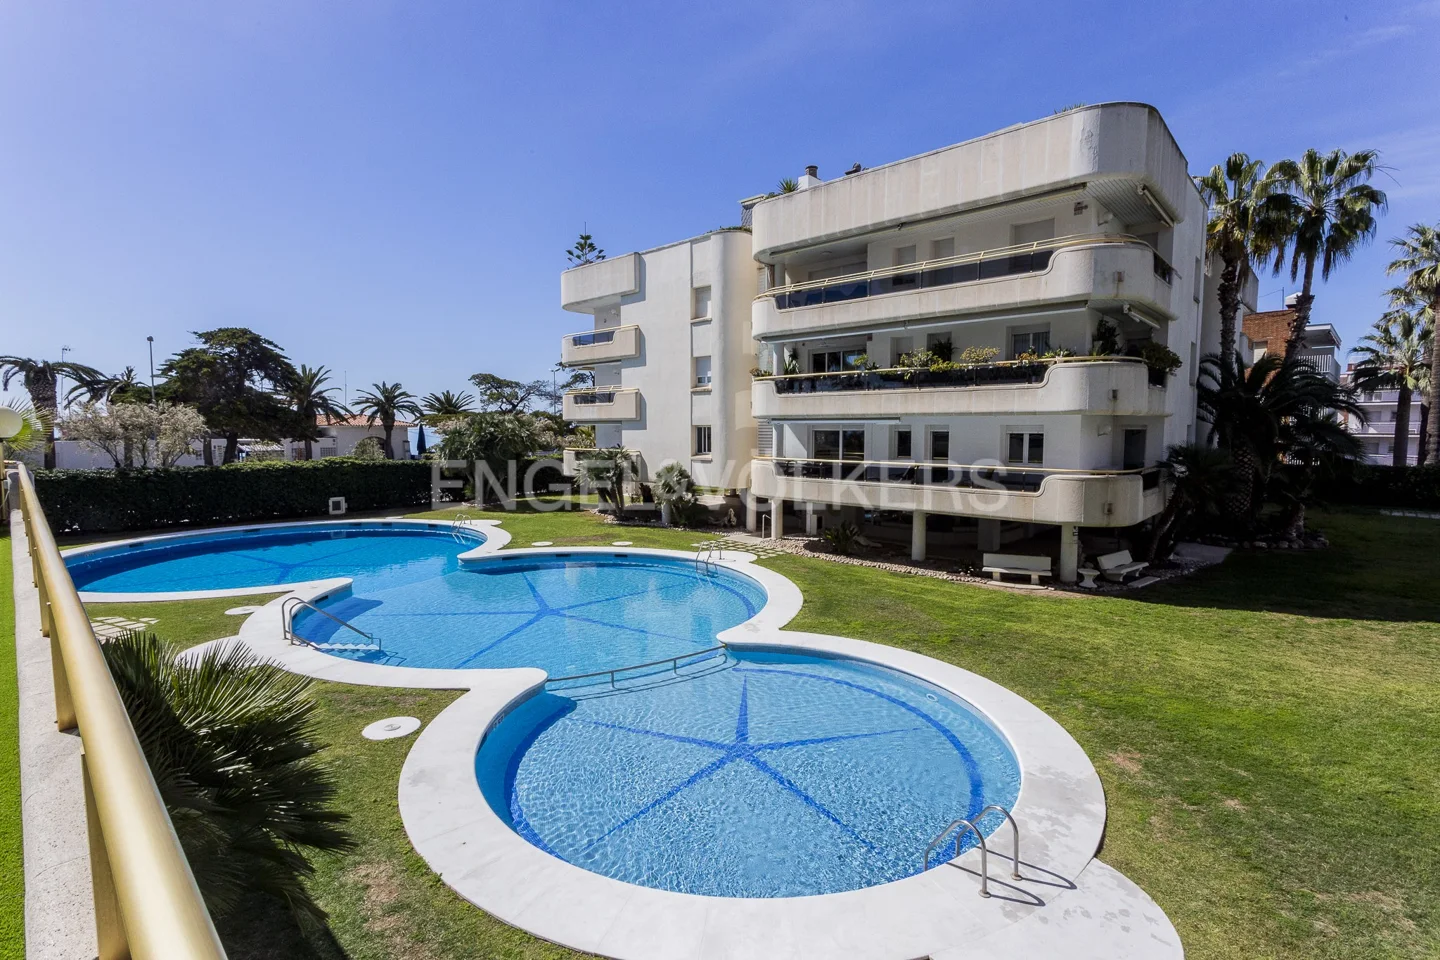 Exclusive frontline apartment in Sitges